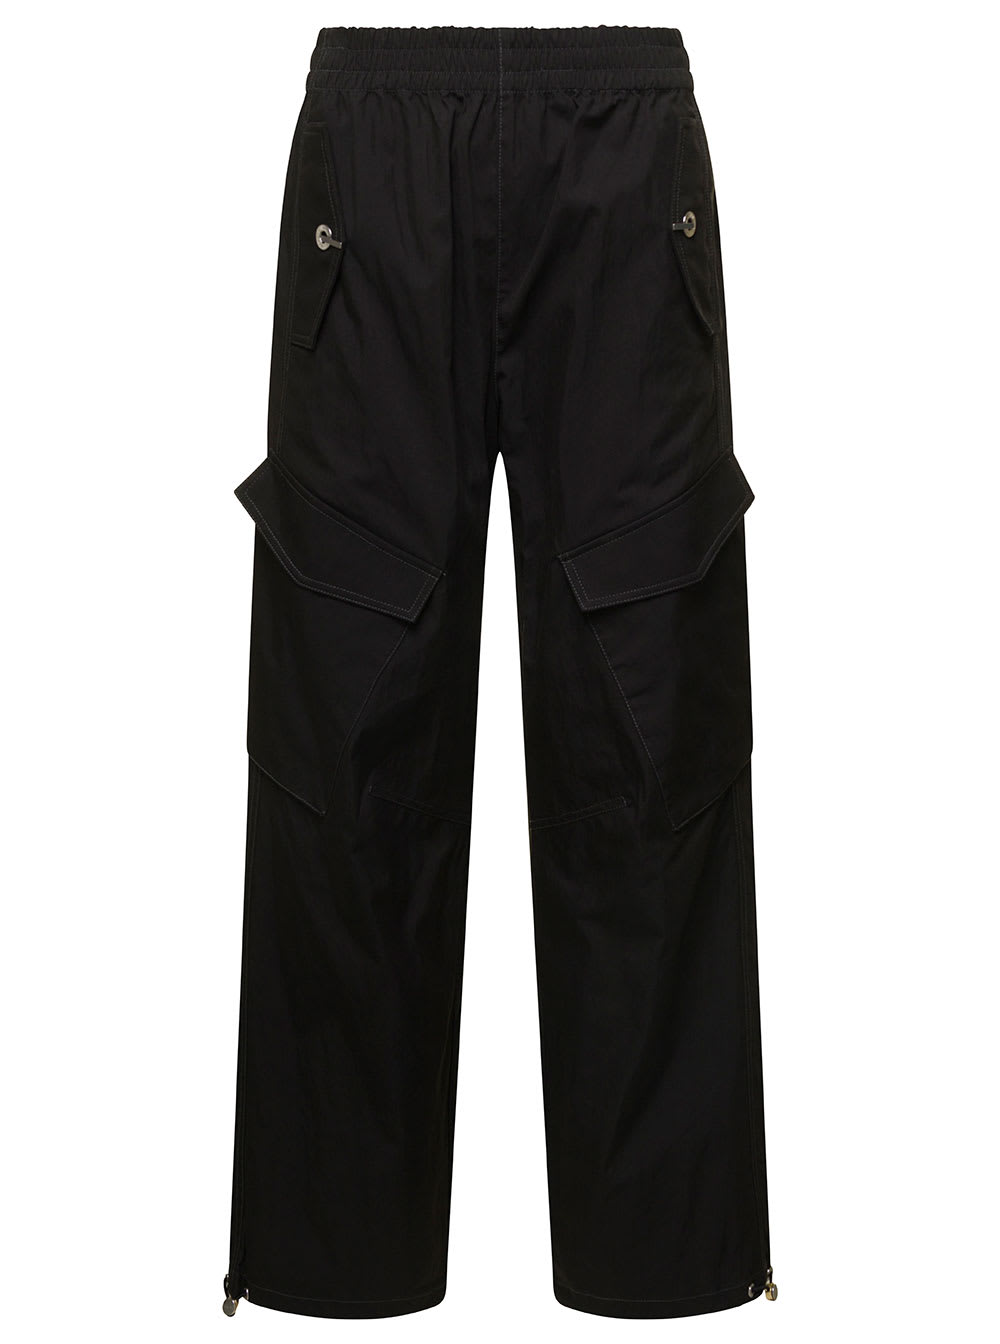 Dion Lee Black Cargo Pants With Patch Pockets In Cotton Blend Woman